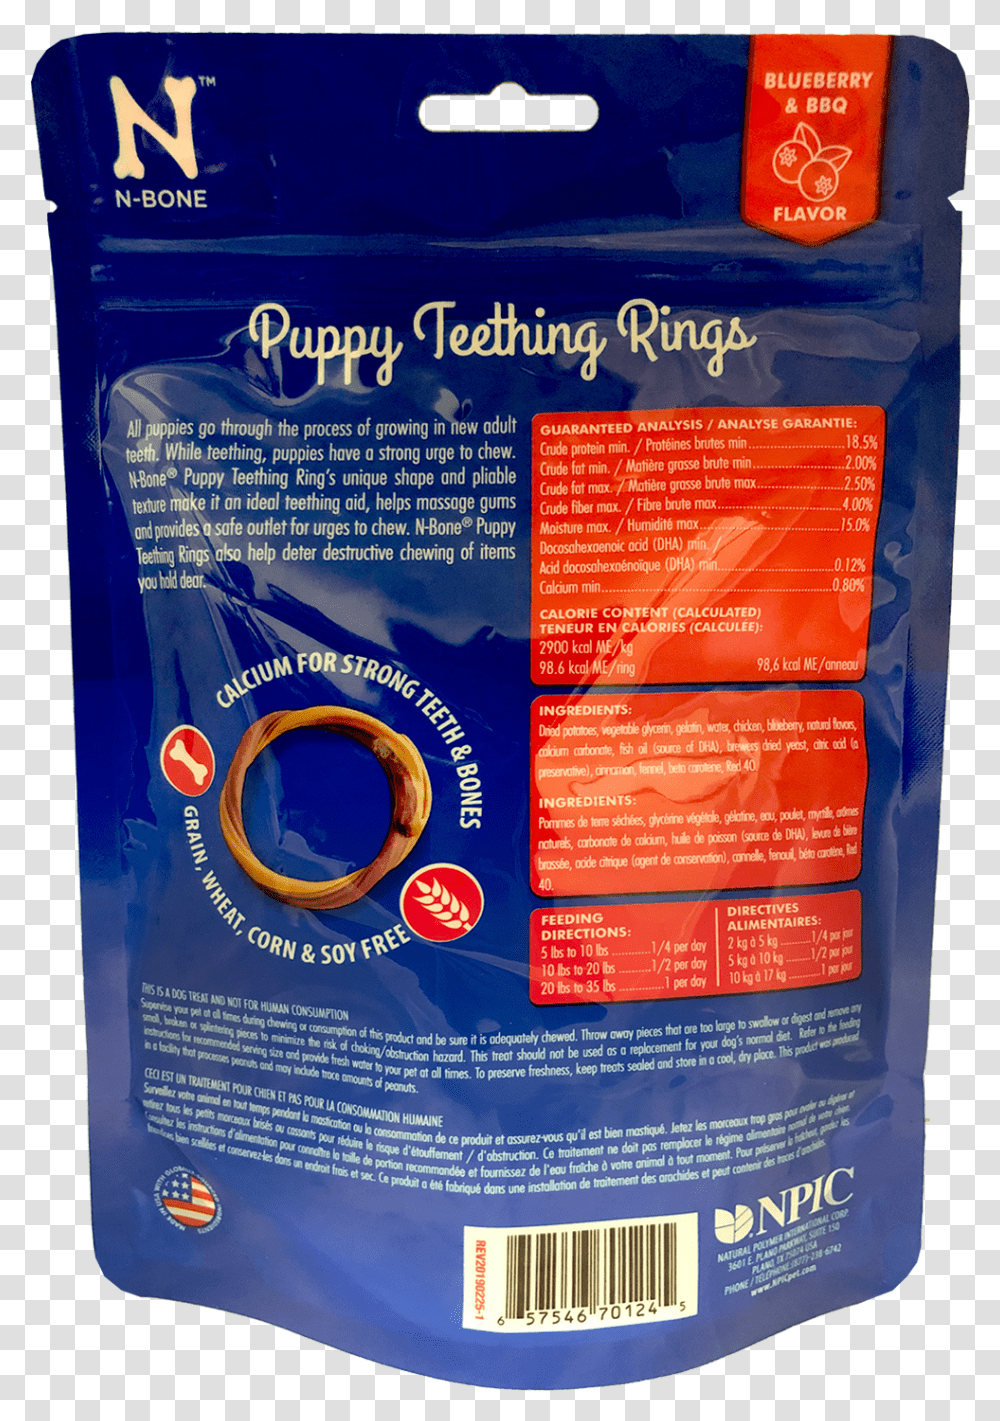 N Bone Puppy Teething Rings Grain Free Blueberry Amp Box, Advertisement, Poster, Flyer, Paper Transparent Png